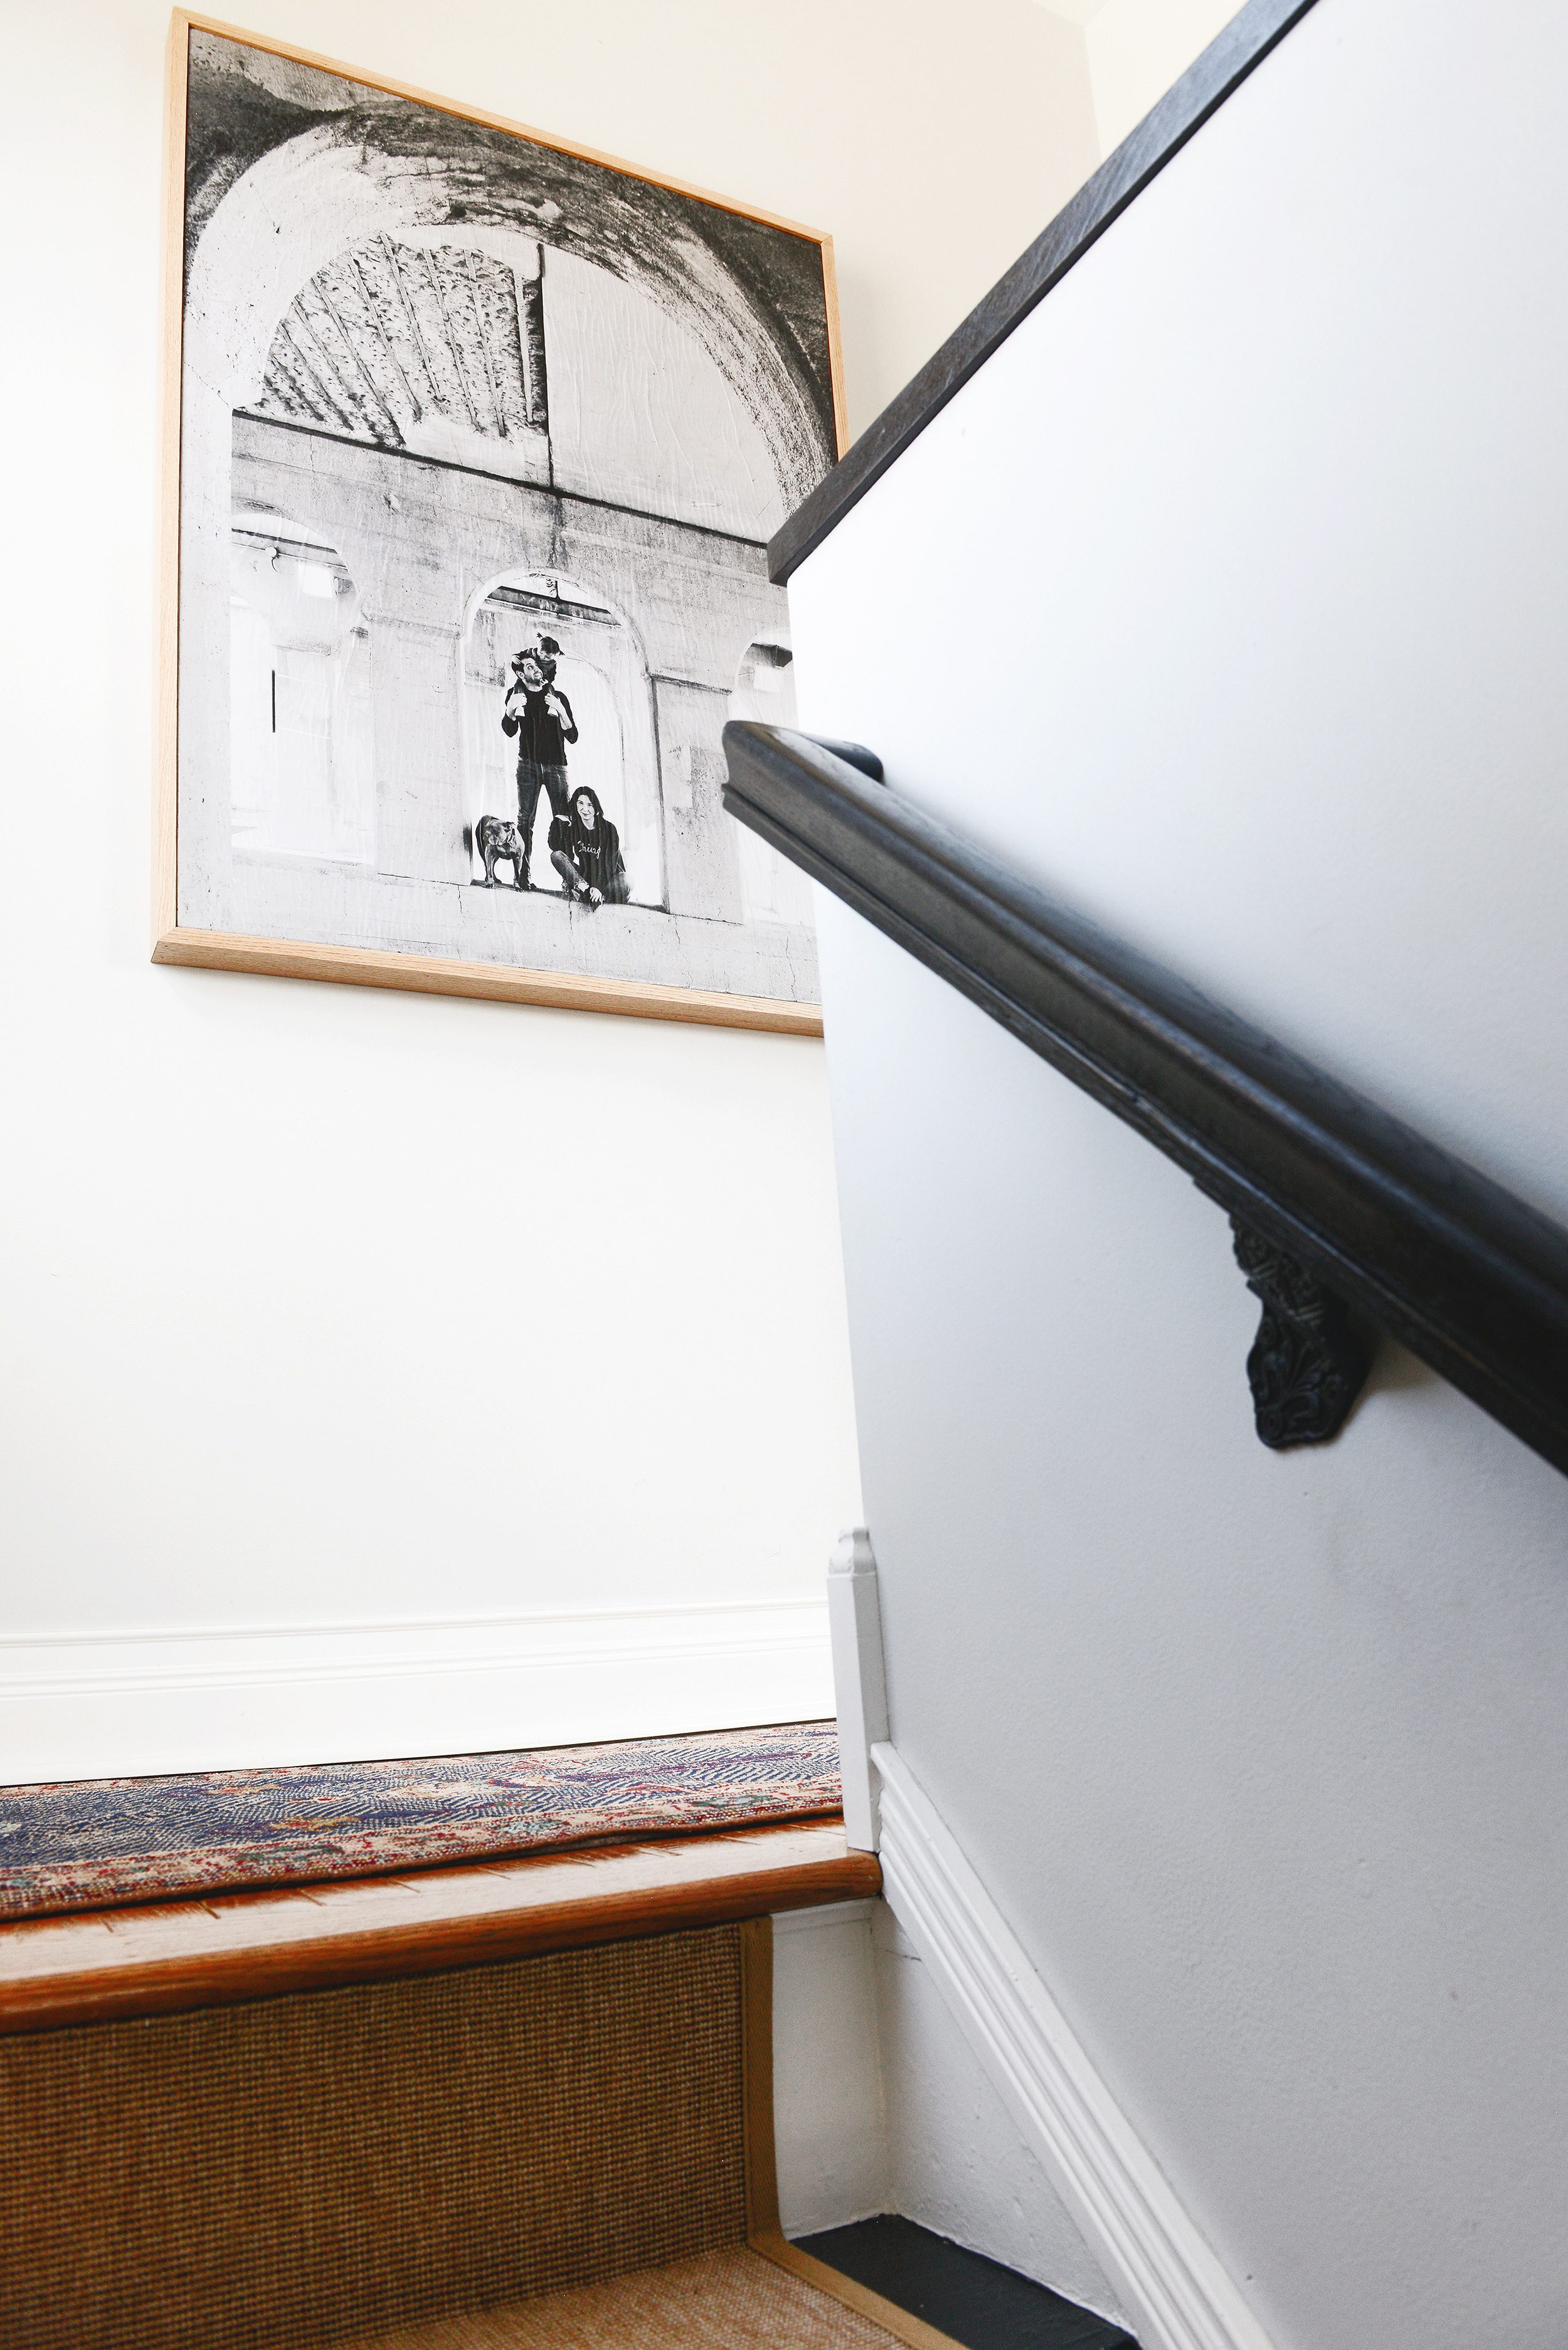 Large engineer print from the perspective of walking up the stairs | DIY engineer print art | via Yellow Brick Home